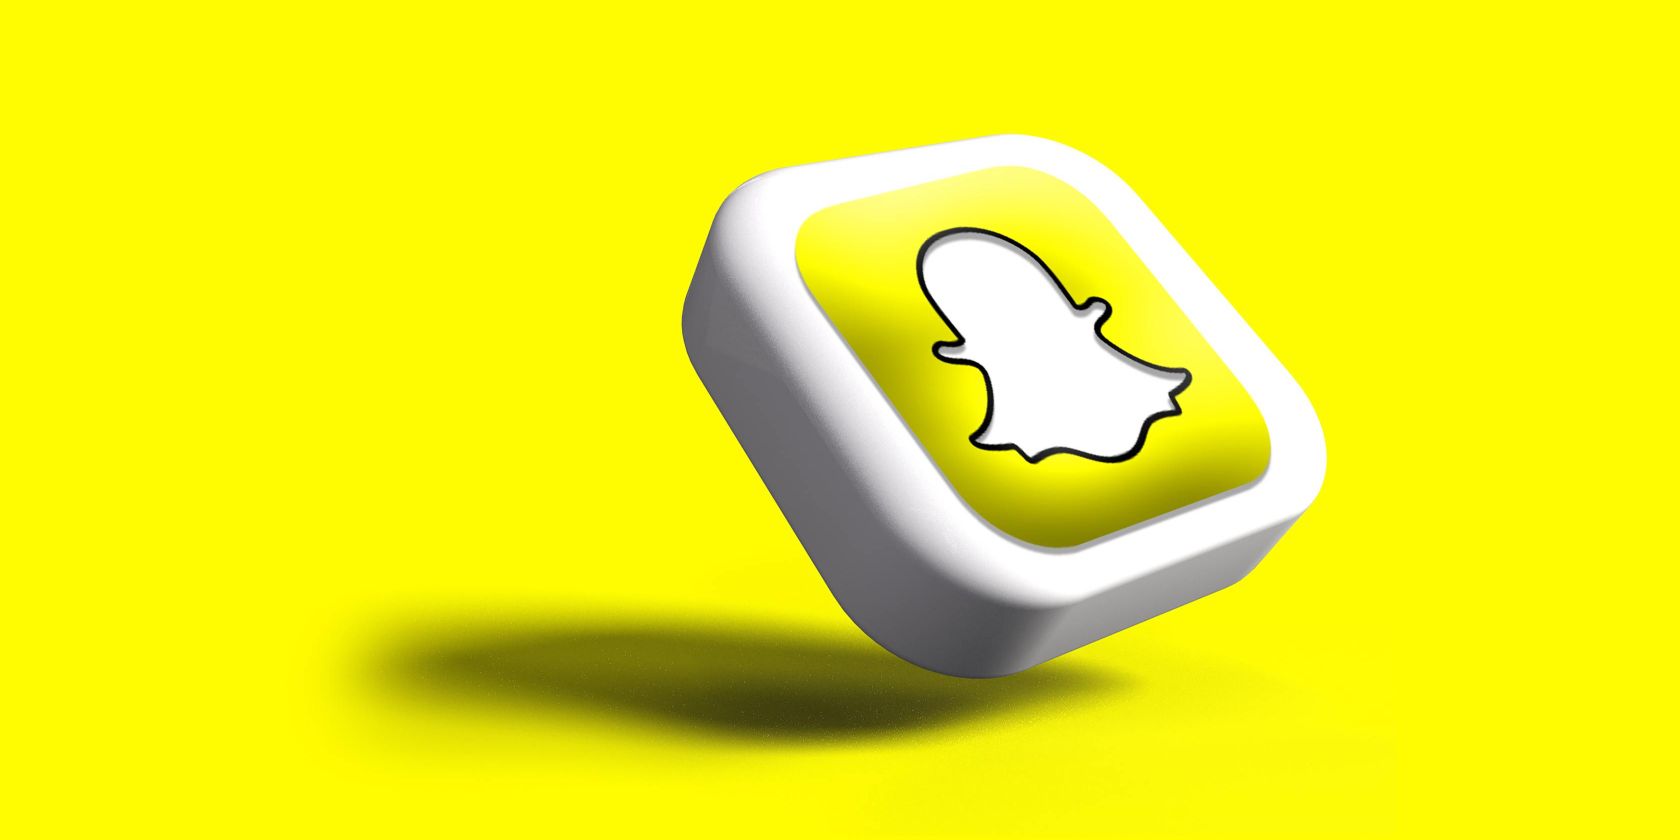 How to Use Snapchat on the Web